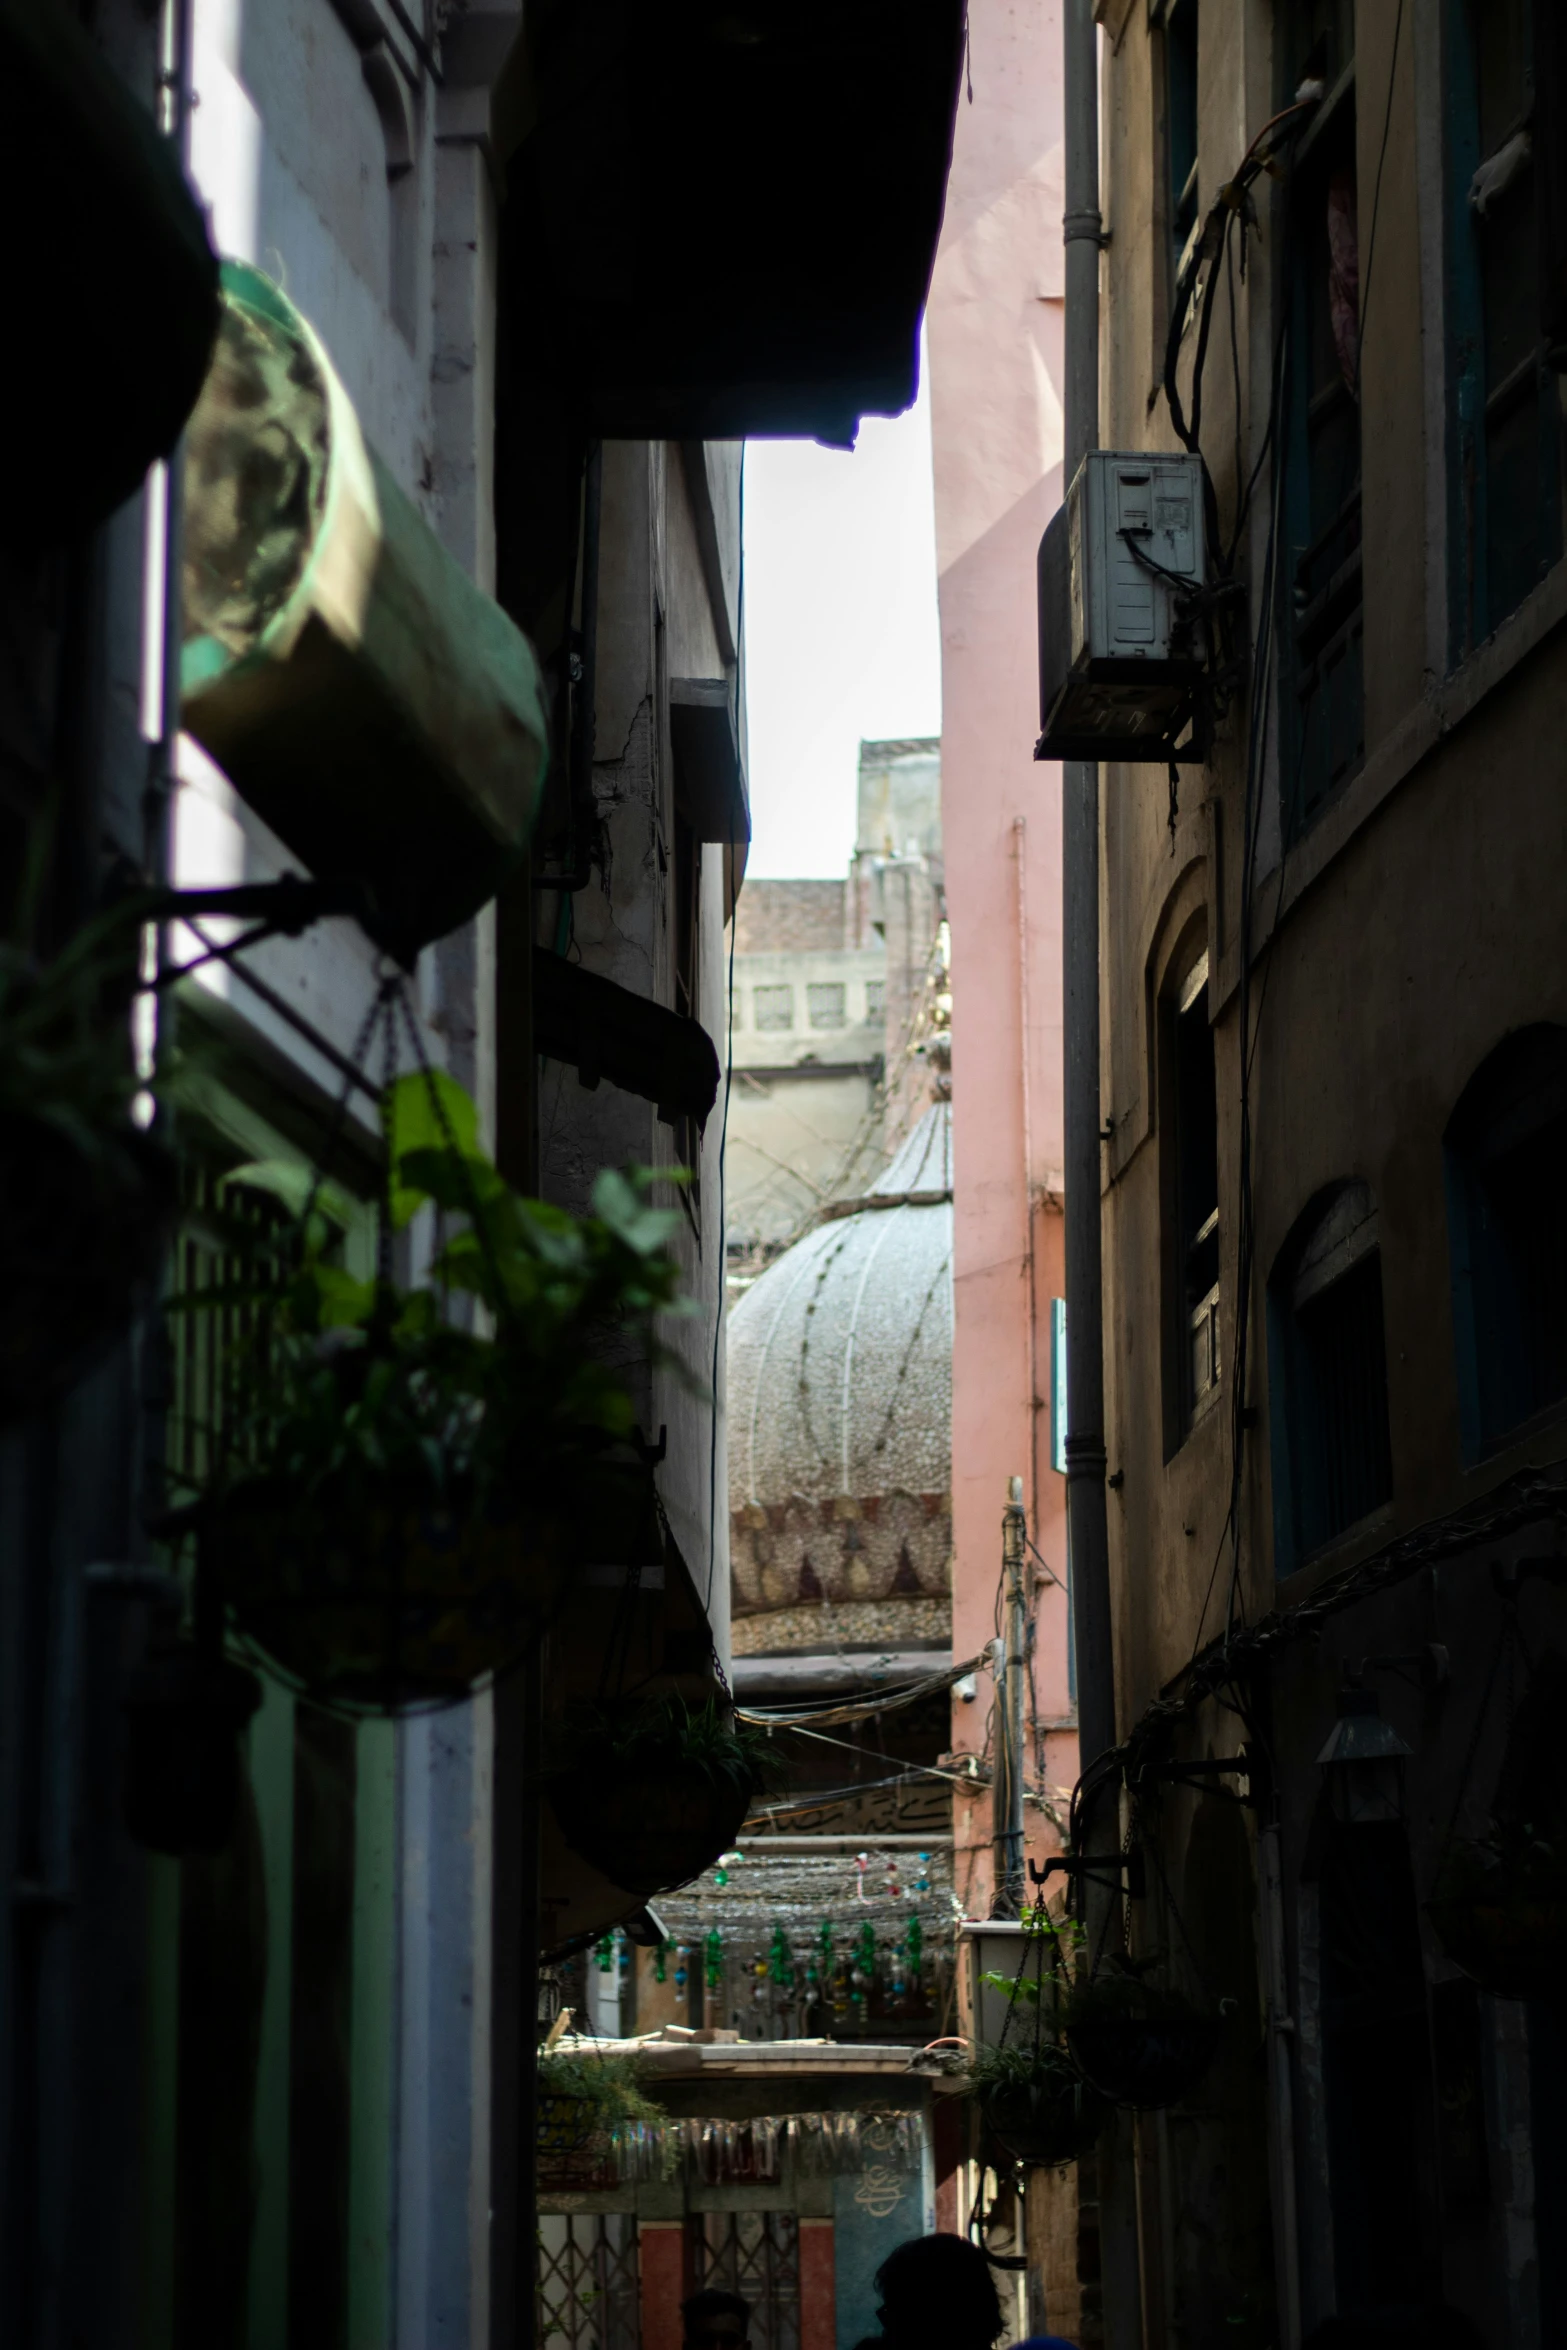 an alley way with buildings and a man standing on it